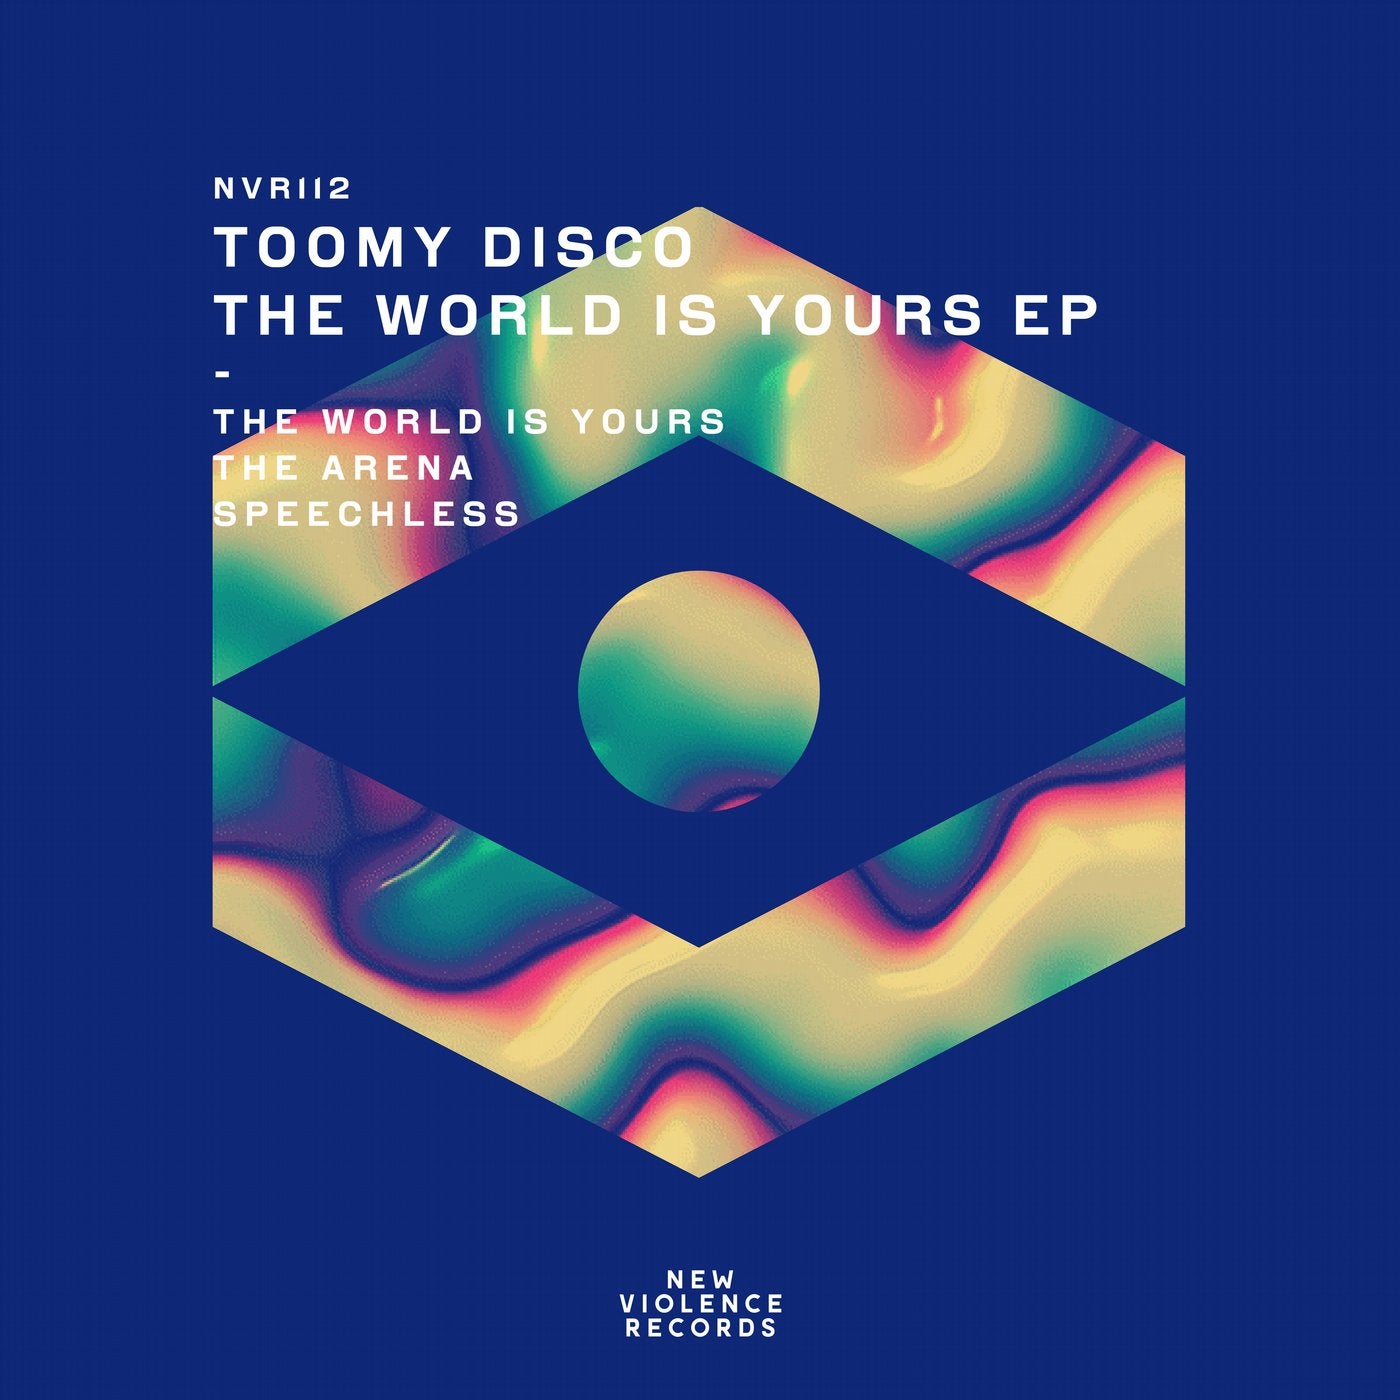 The World Is Yours EP